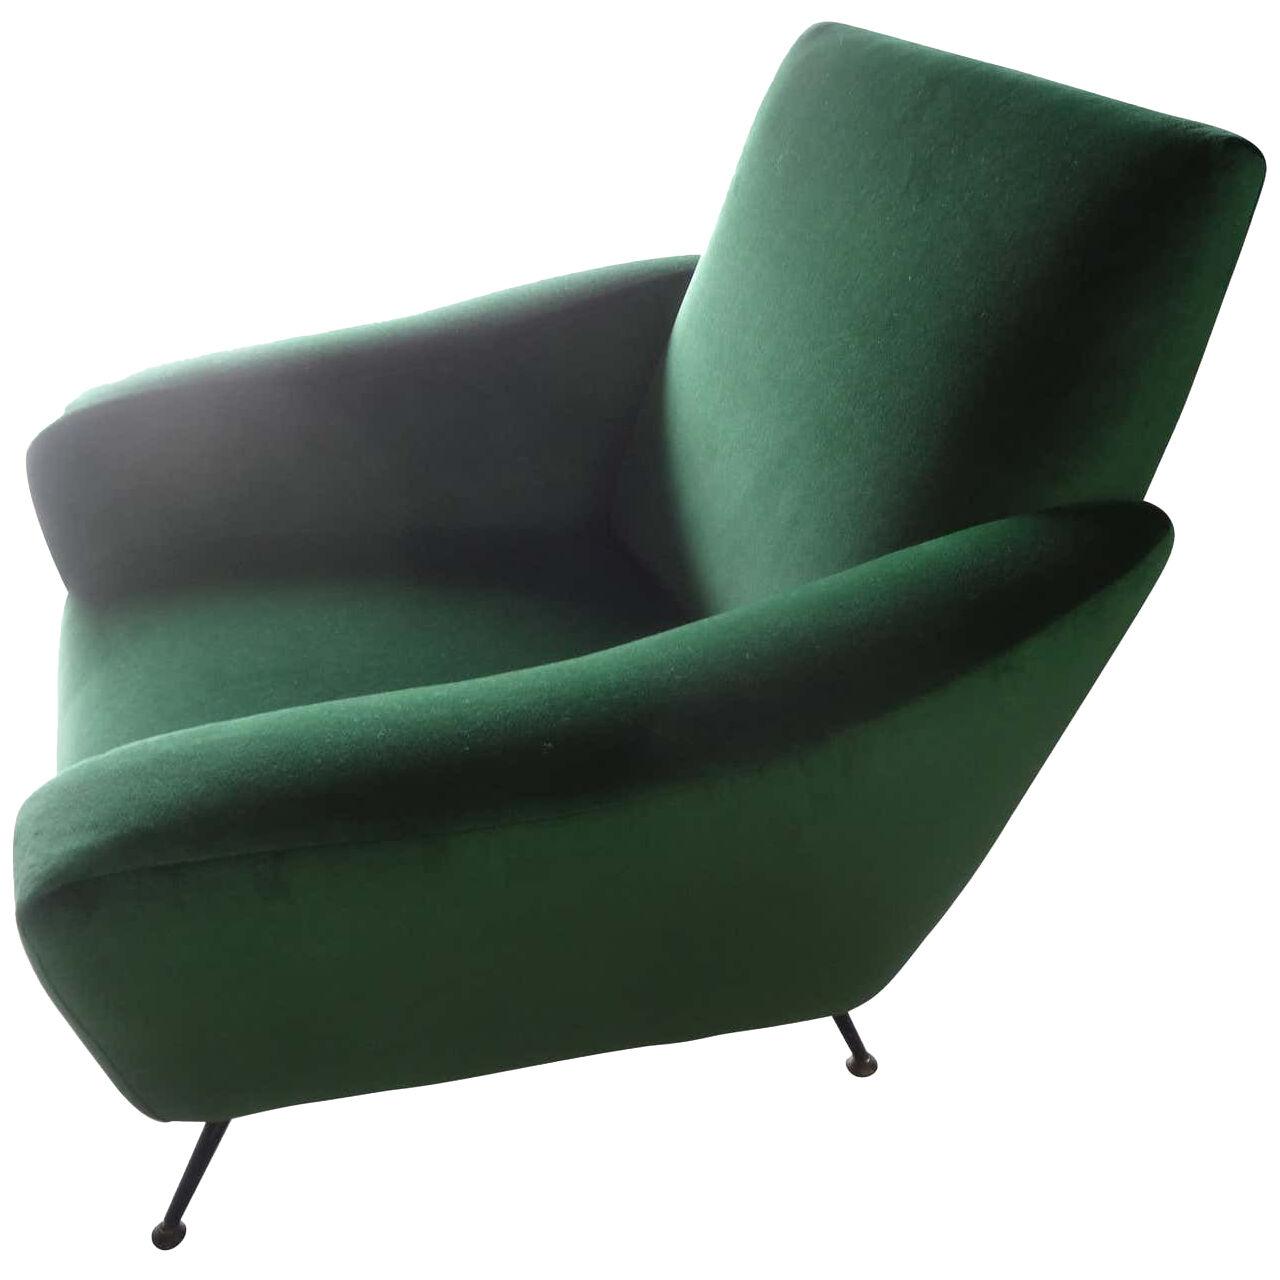 Italian Sculptural Lounge Chair in the Manner of Gio Ponti